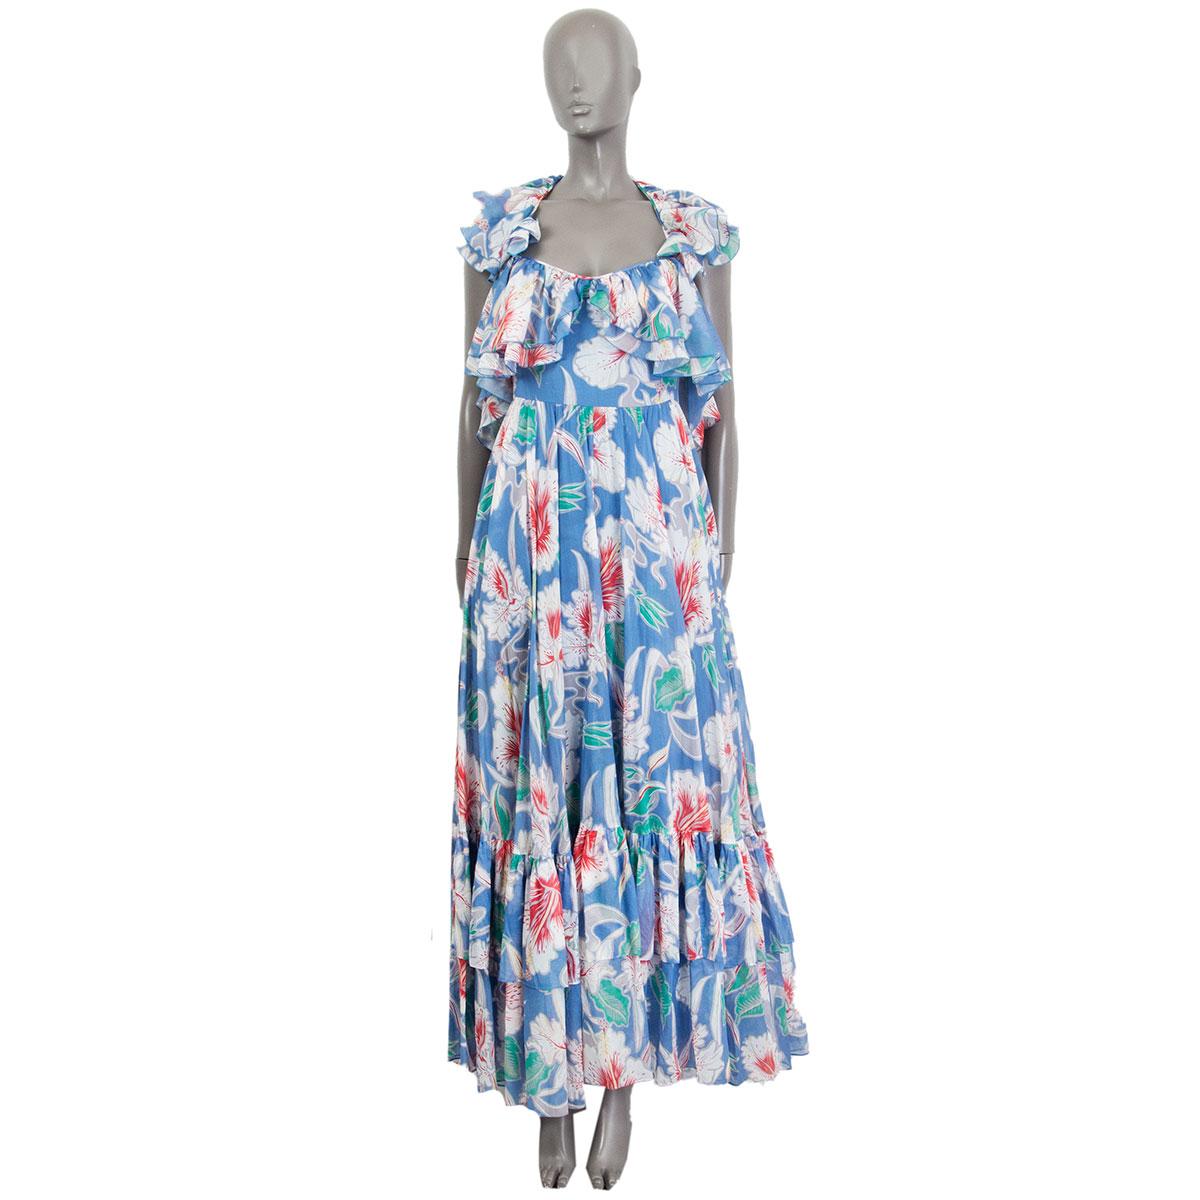 100% authentic Valentino hibiscus-print ruched maxi dress in light blue cotton (100% please note content tag is missing) with multicolored print. Closes with one button behind the neck and with a concealed zipper on the left side, featuring ruches